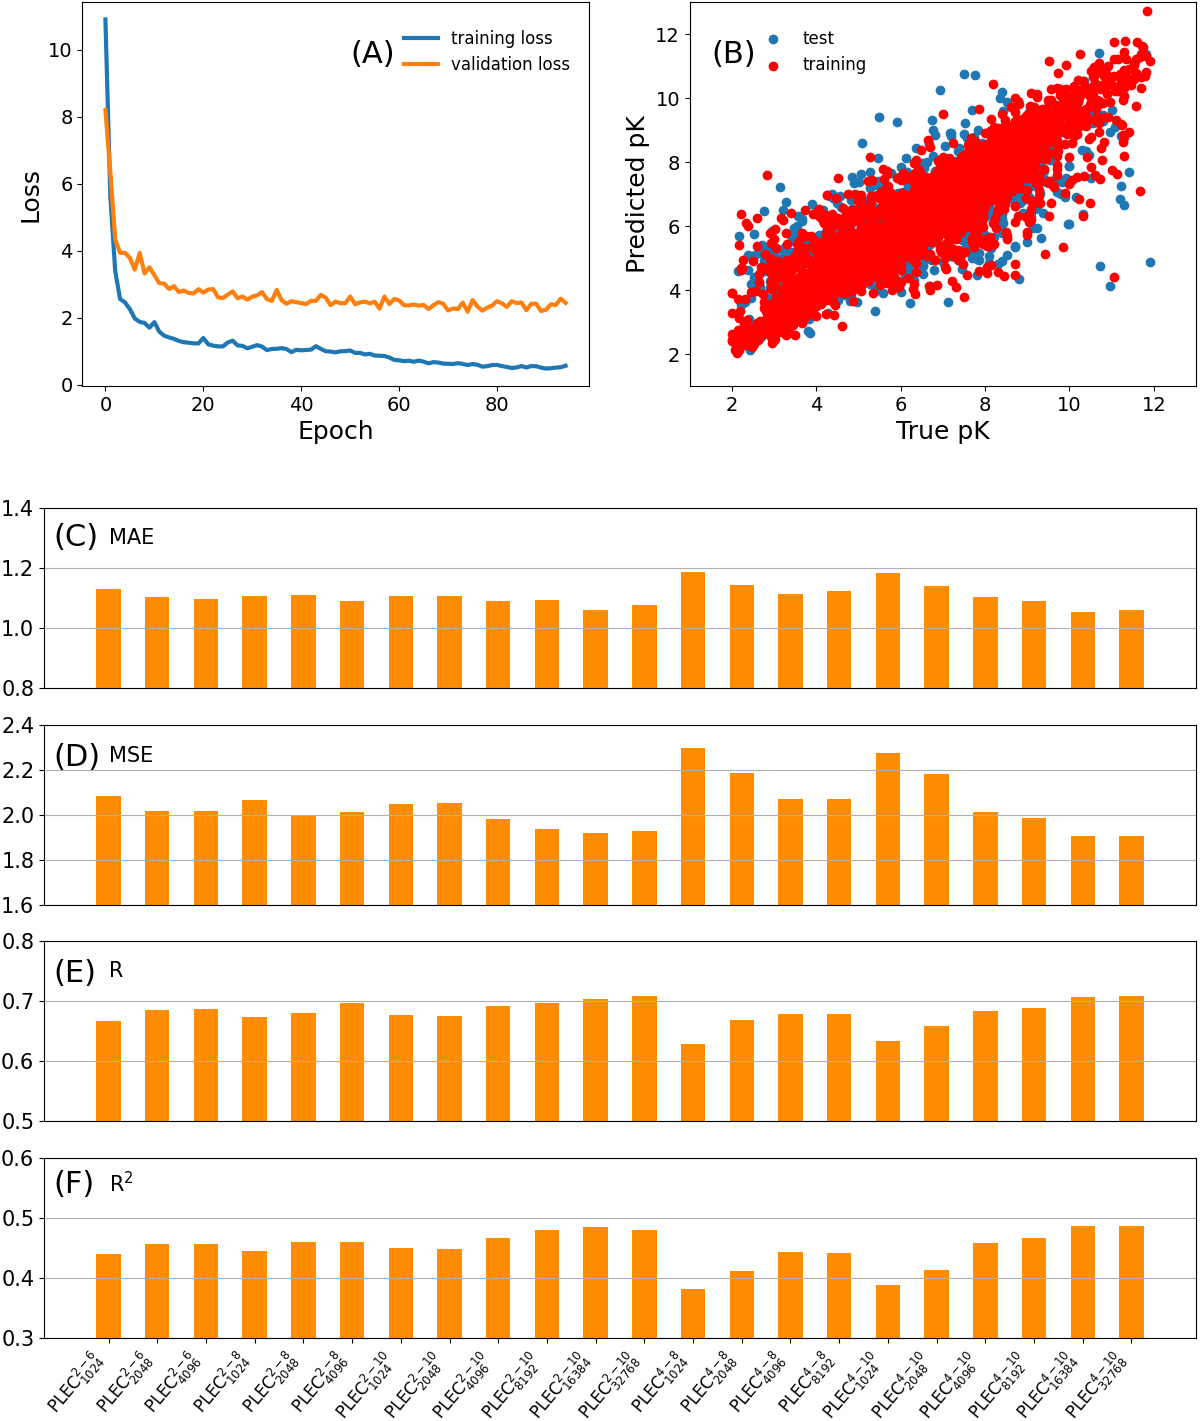 The loss in the training and validation subsets (A) and the scatter plot of the predicted pK vs. experimentally determined pK (B) for PLEC163844-10, respectively. The MAE (C), MSE (D), R (E), and R2 (F) in the test subset for different PLECs.